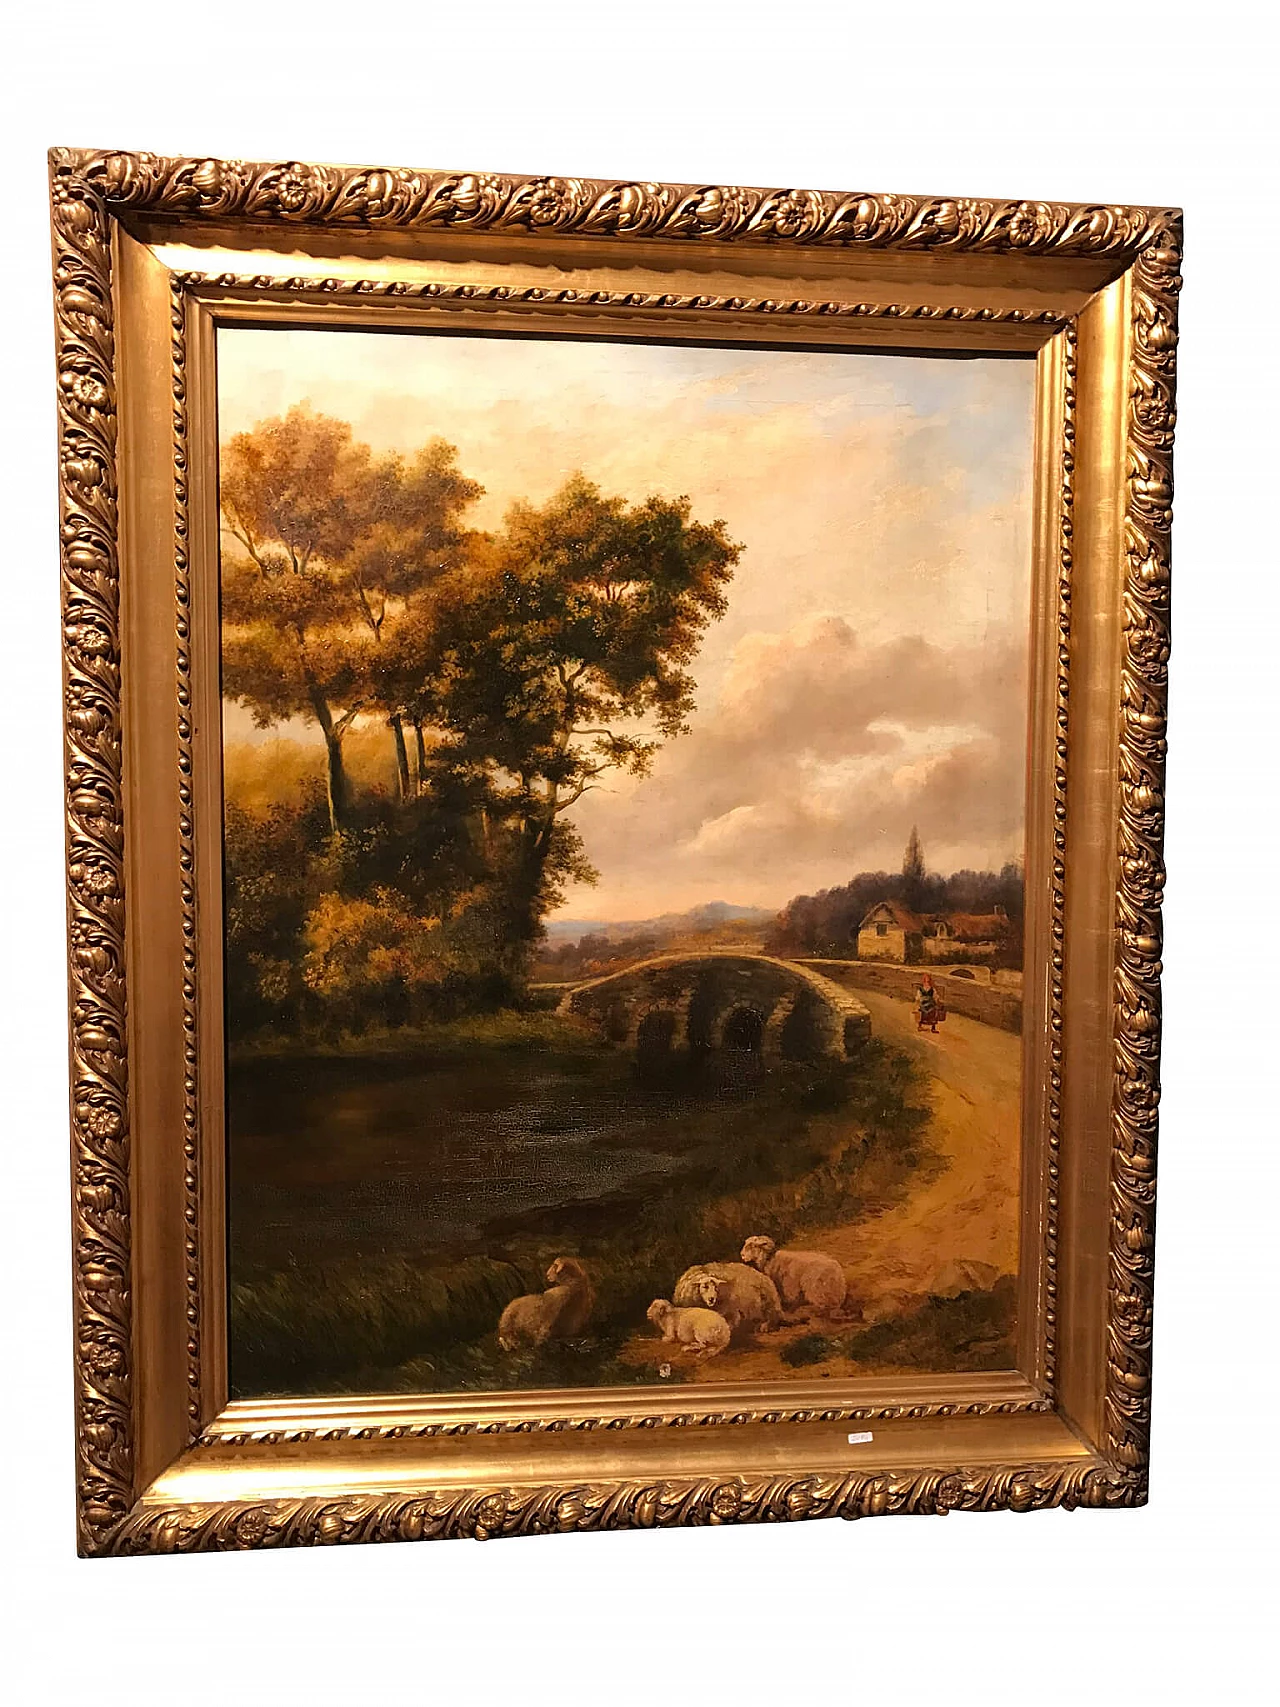 Oil painting on canvas with bucolic landscape, '800 1176544